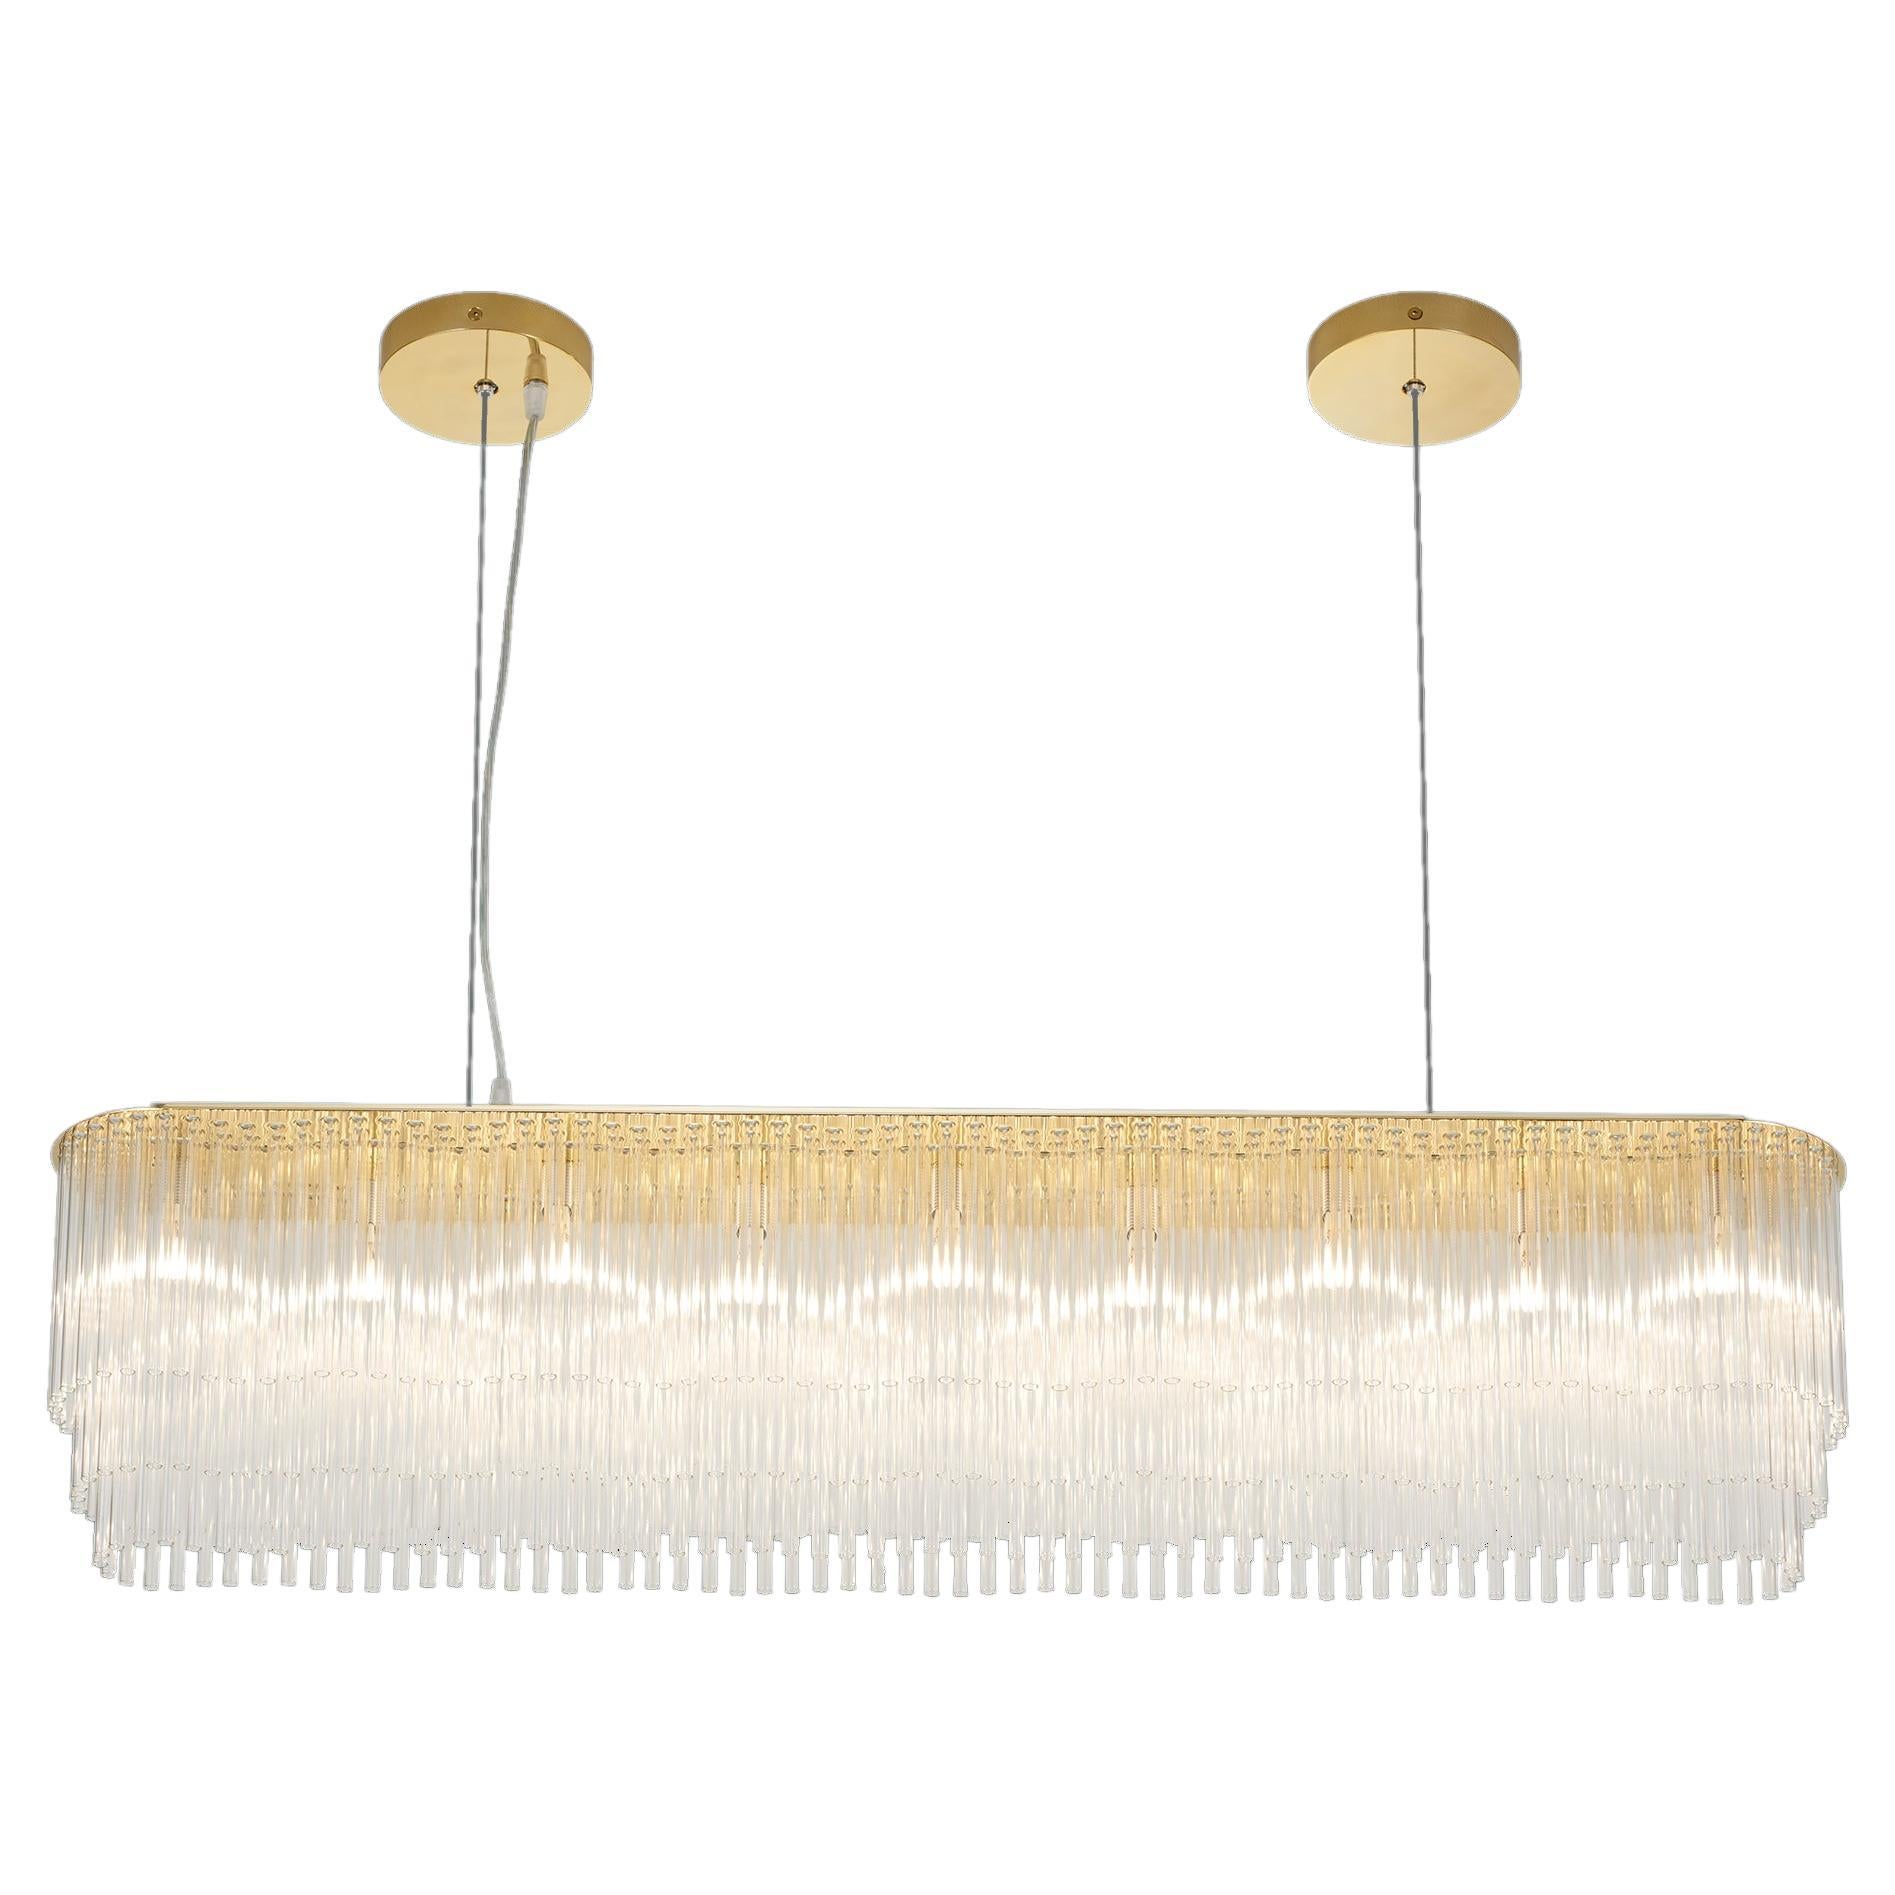 Linear Chandelier Thin 1445mm/58.75"  in Polished Brass / Tiered Glass Profile For Sale